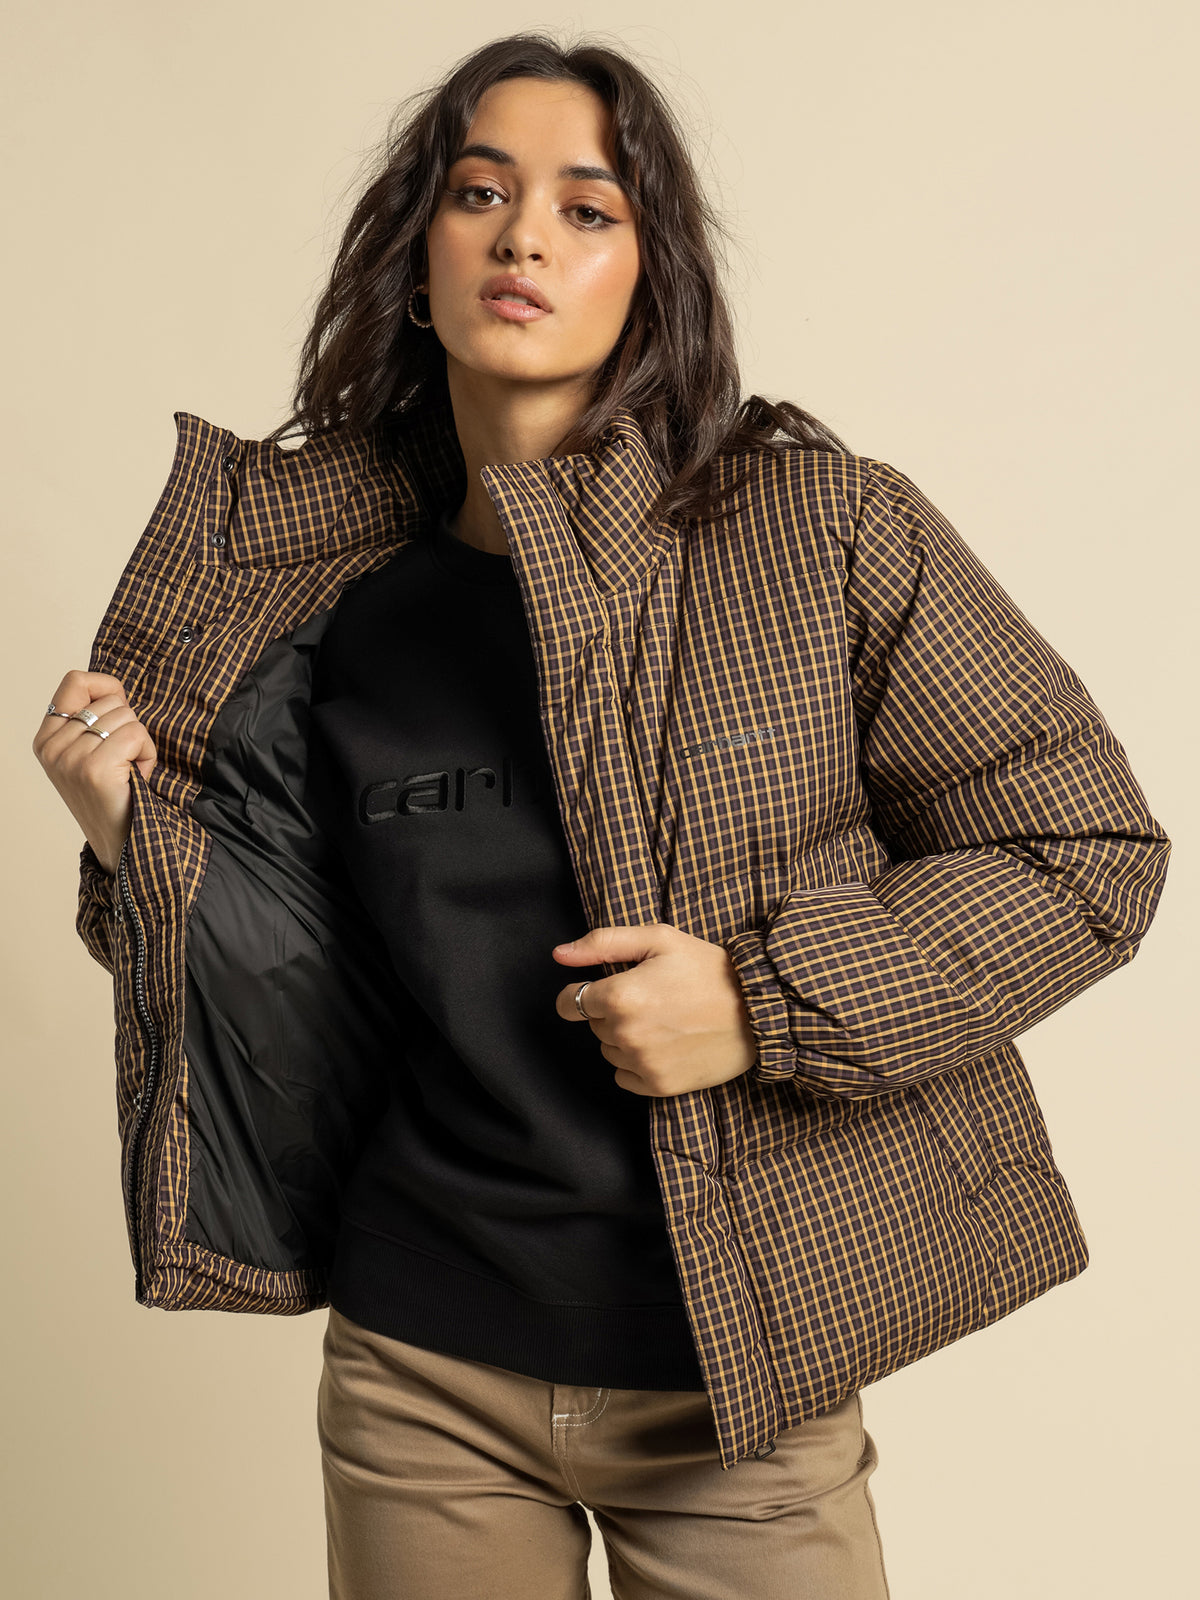 Danville Puffer Jacket in Check